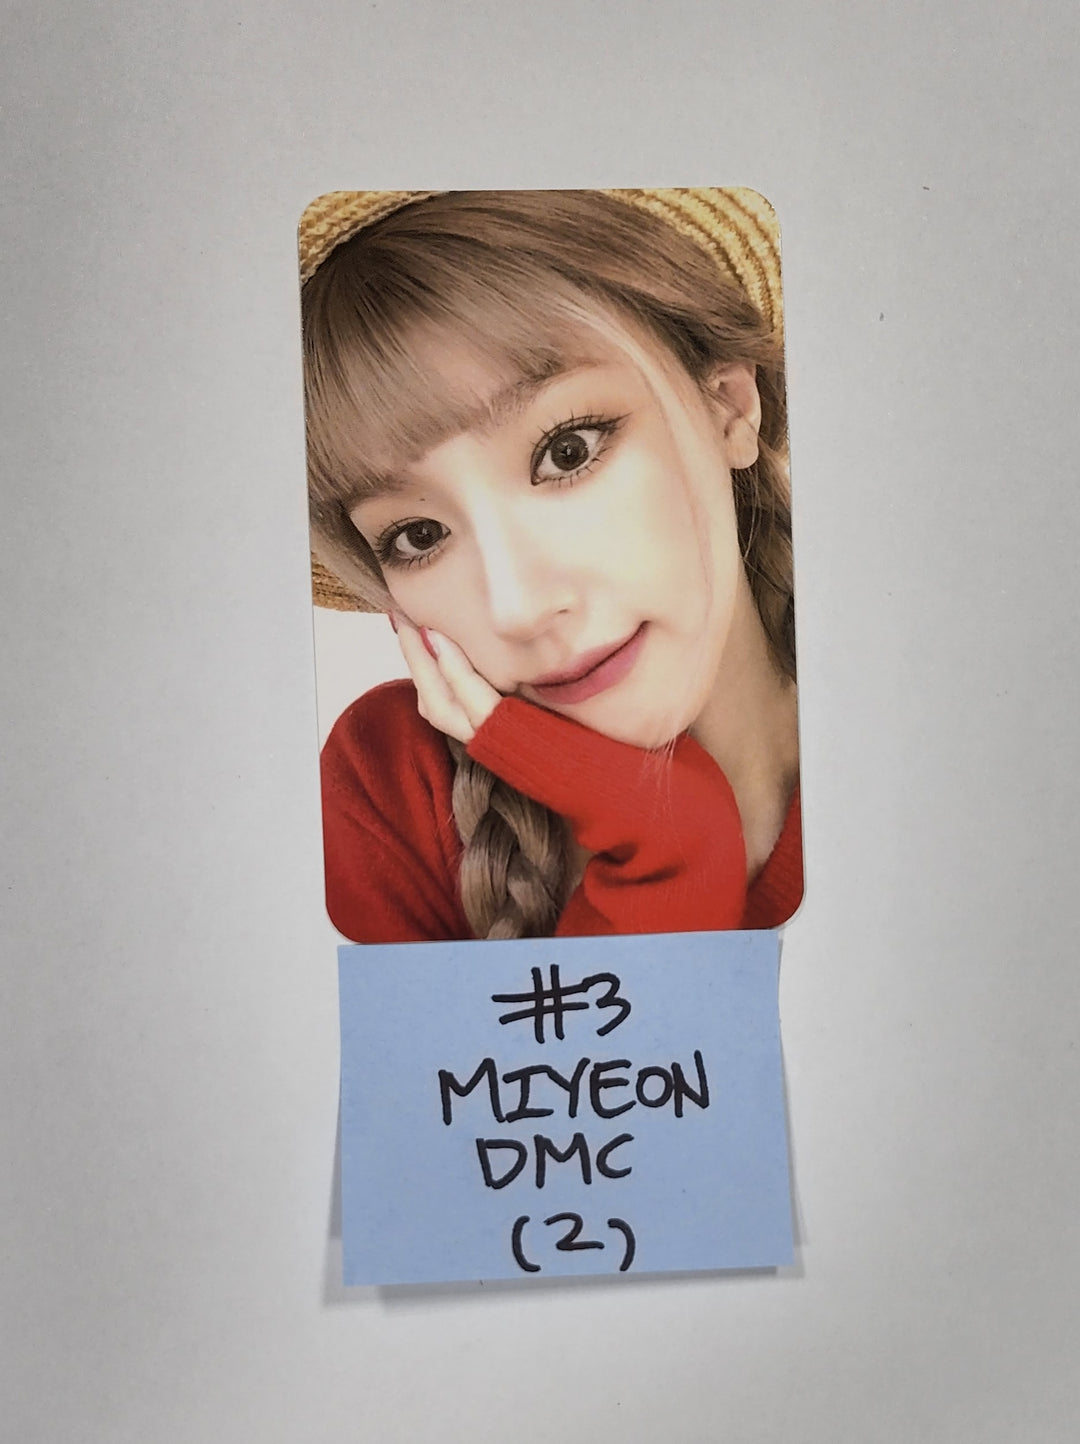 MIYEON [Of (g) I-DLE] "MY" 1st - DMC Music Fansign Event Photocard